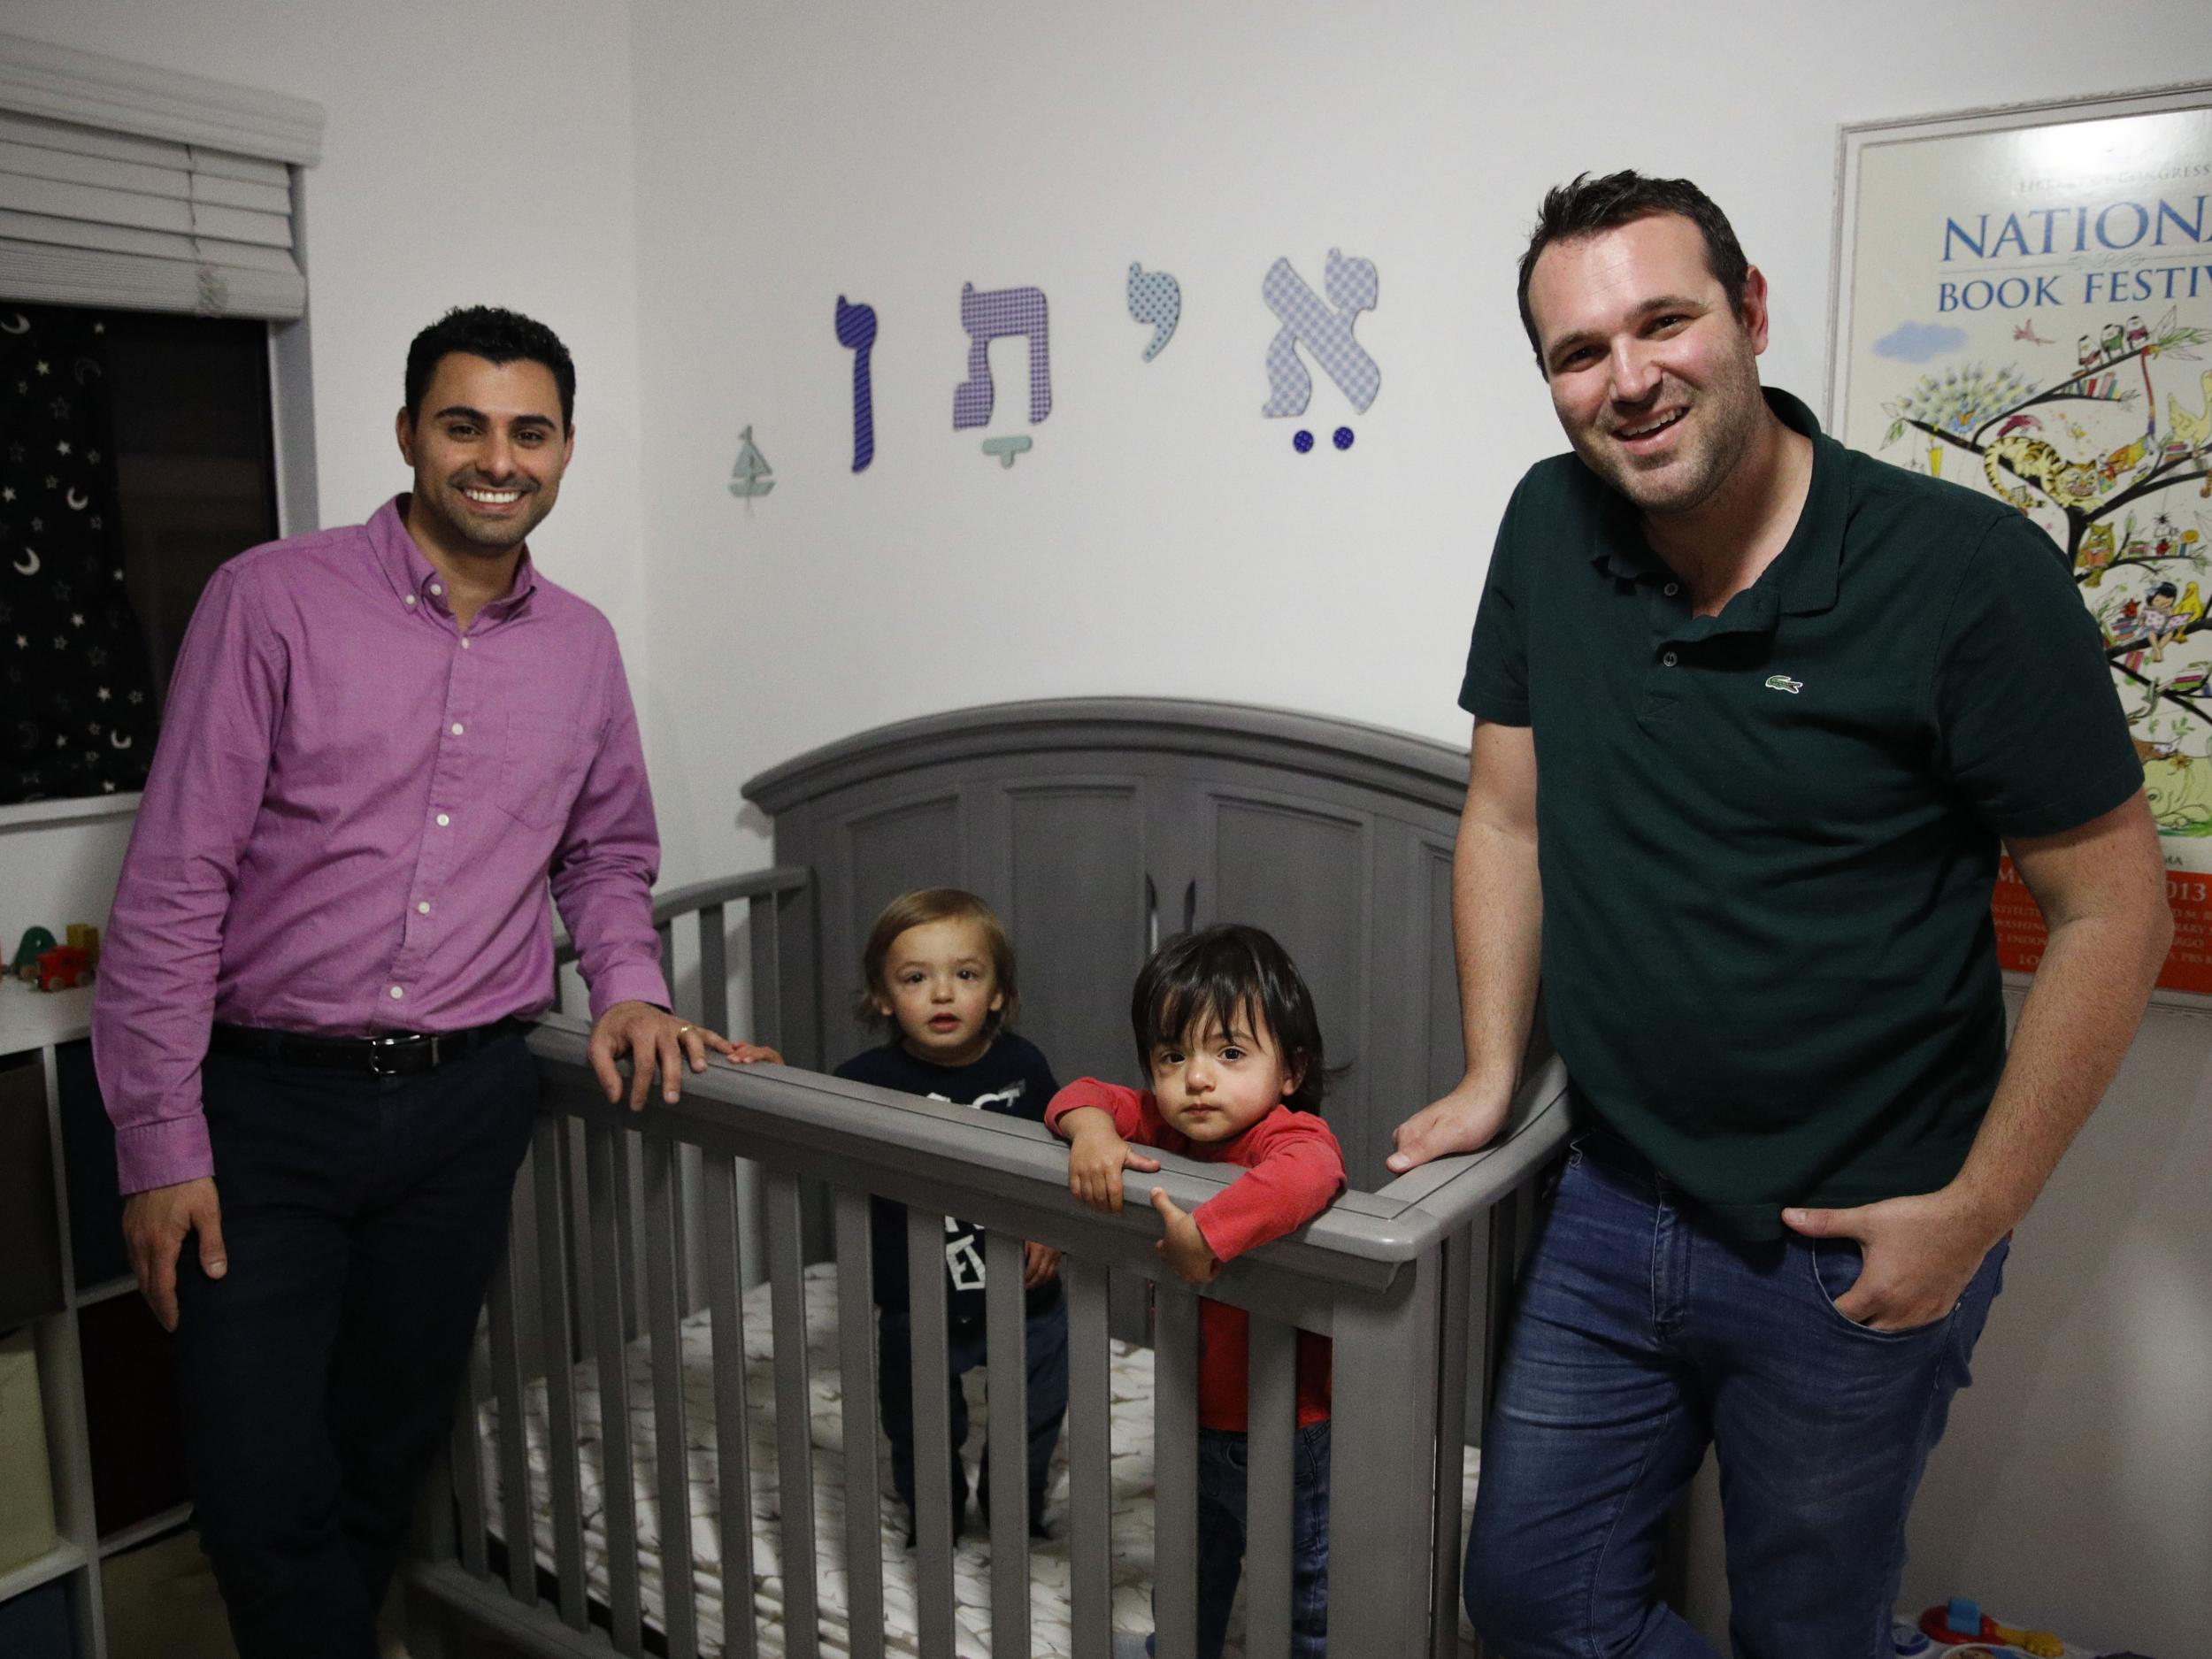 Elad Dvash-Banks, left, and his partner, Andrew, with their twin sons, Ethan, centre right, and Aiden